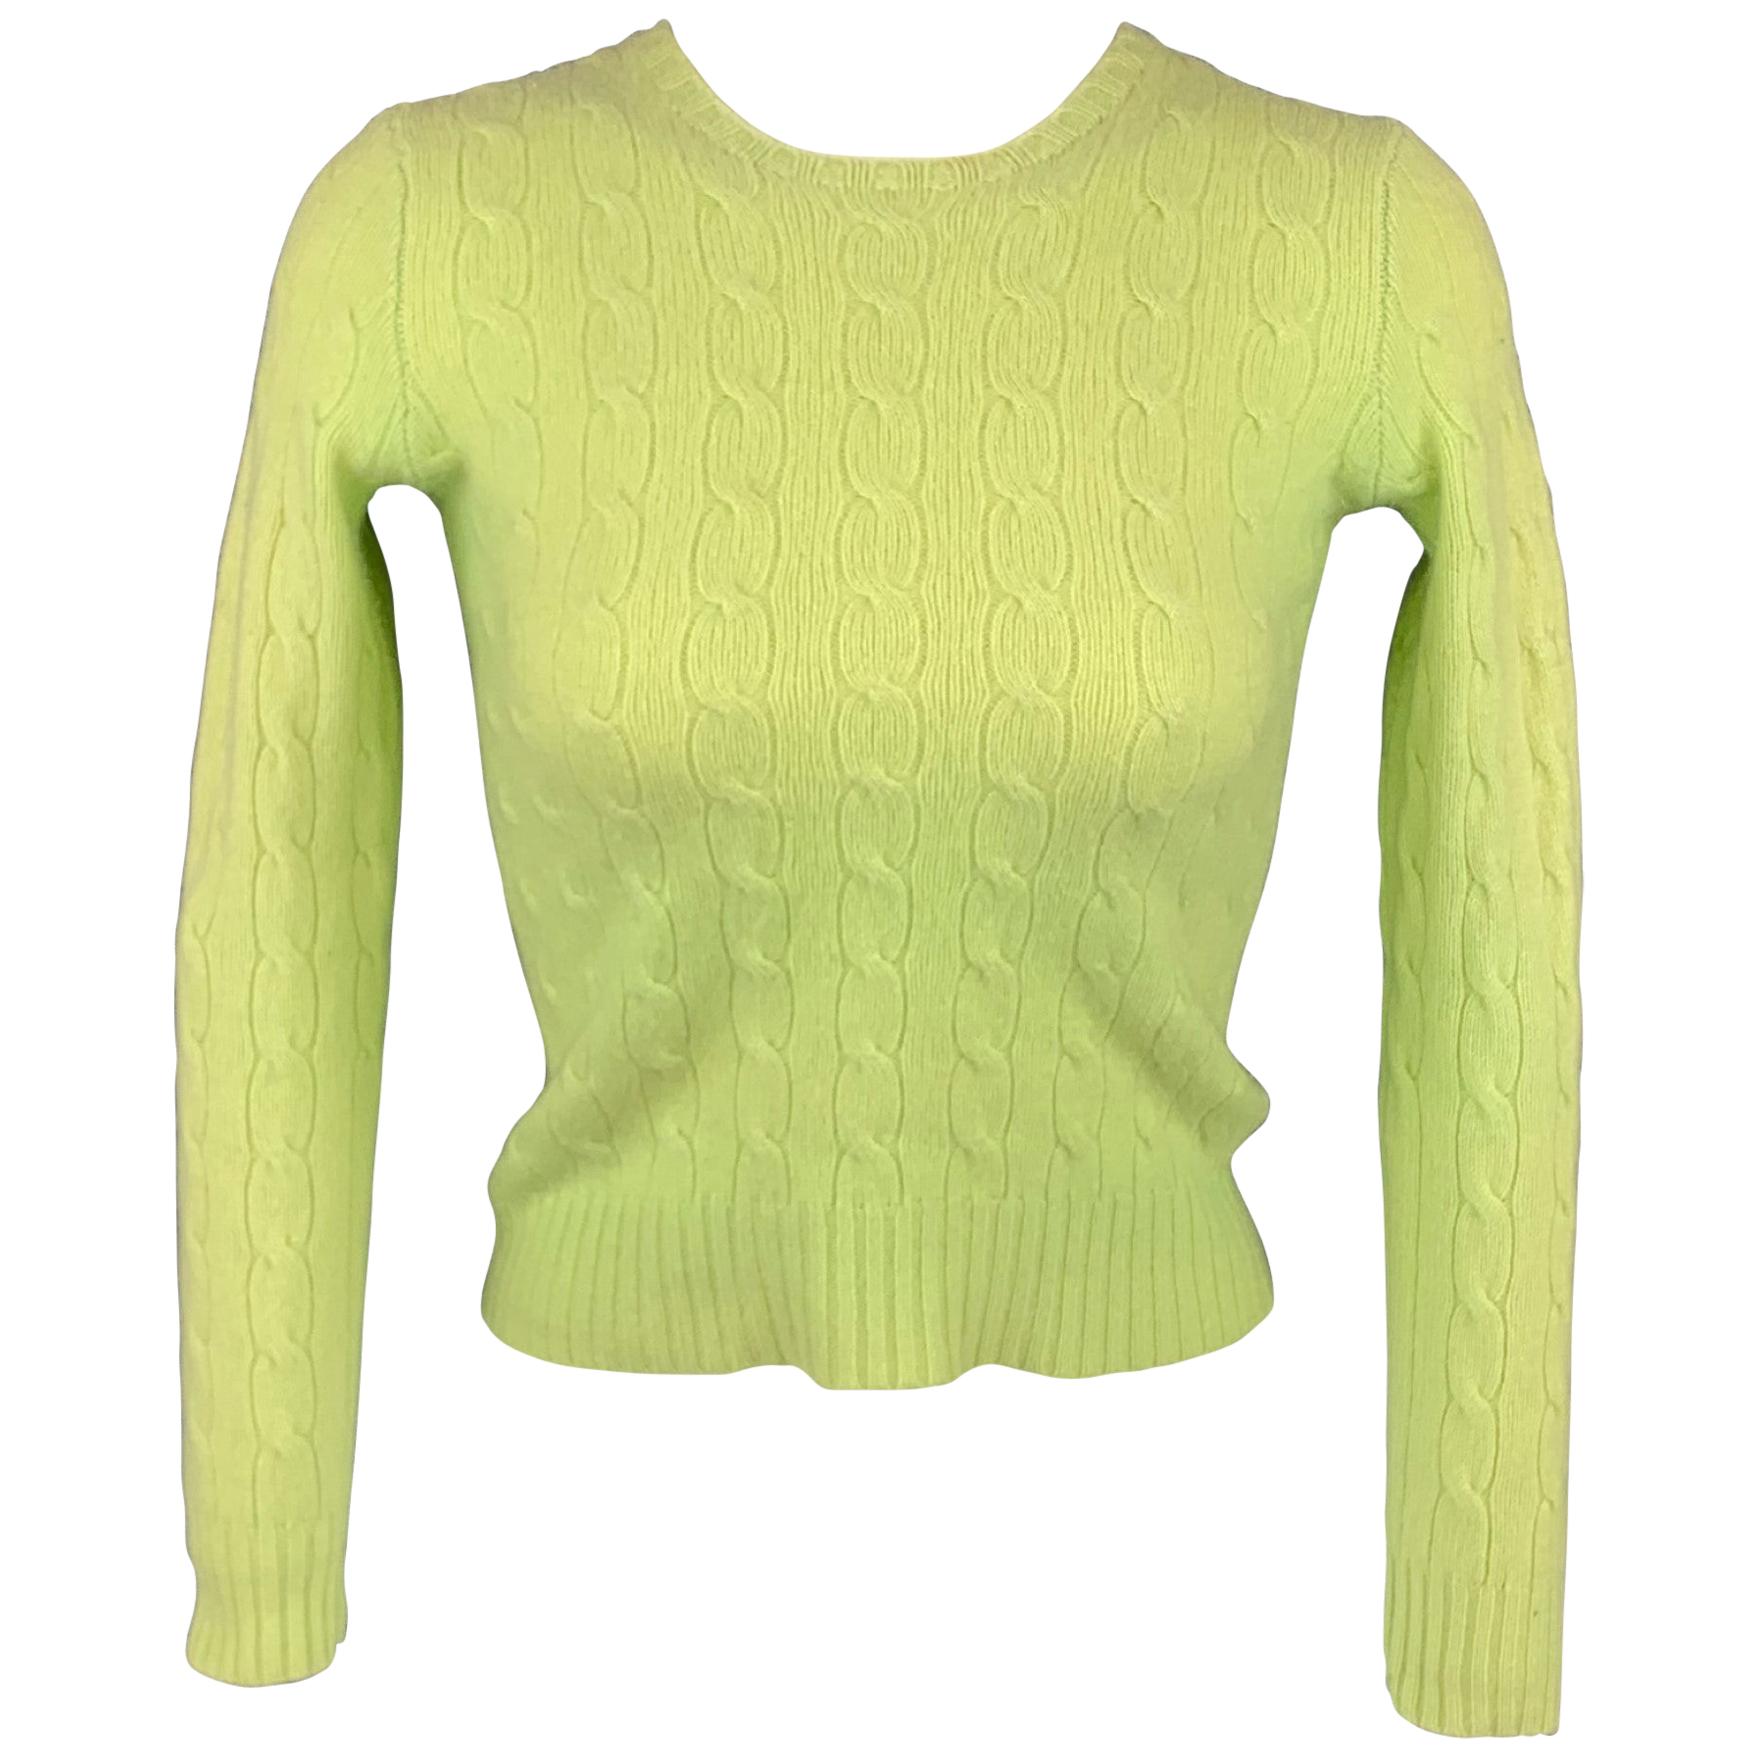 RALPH LAUREN Black Label Size S Chartreuse Knitted Cashmere Slim Fit Sweater